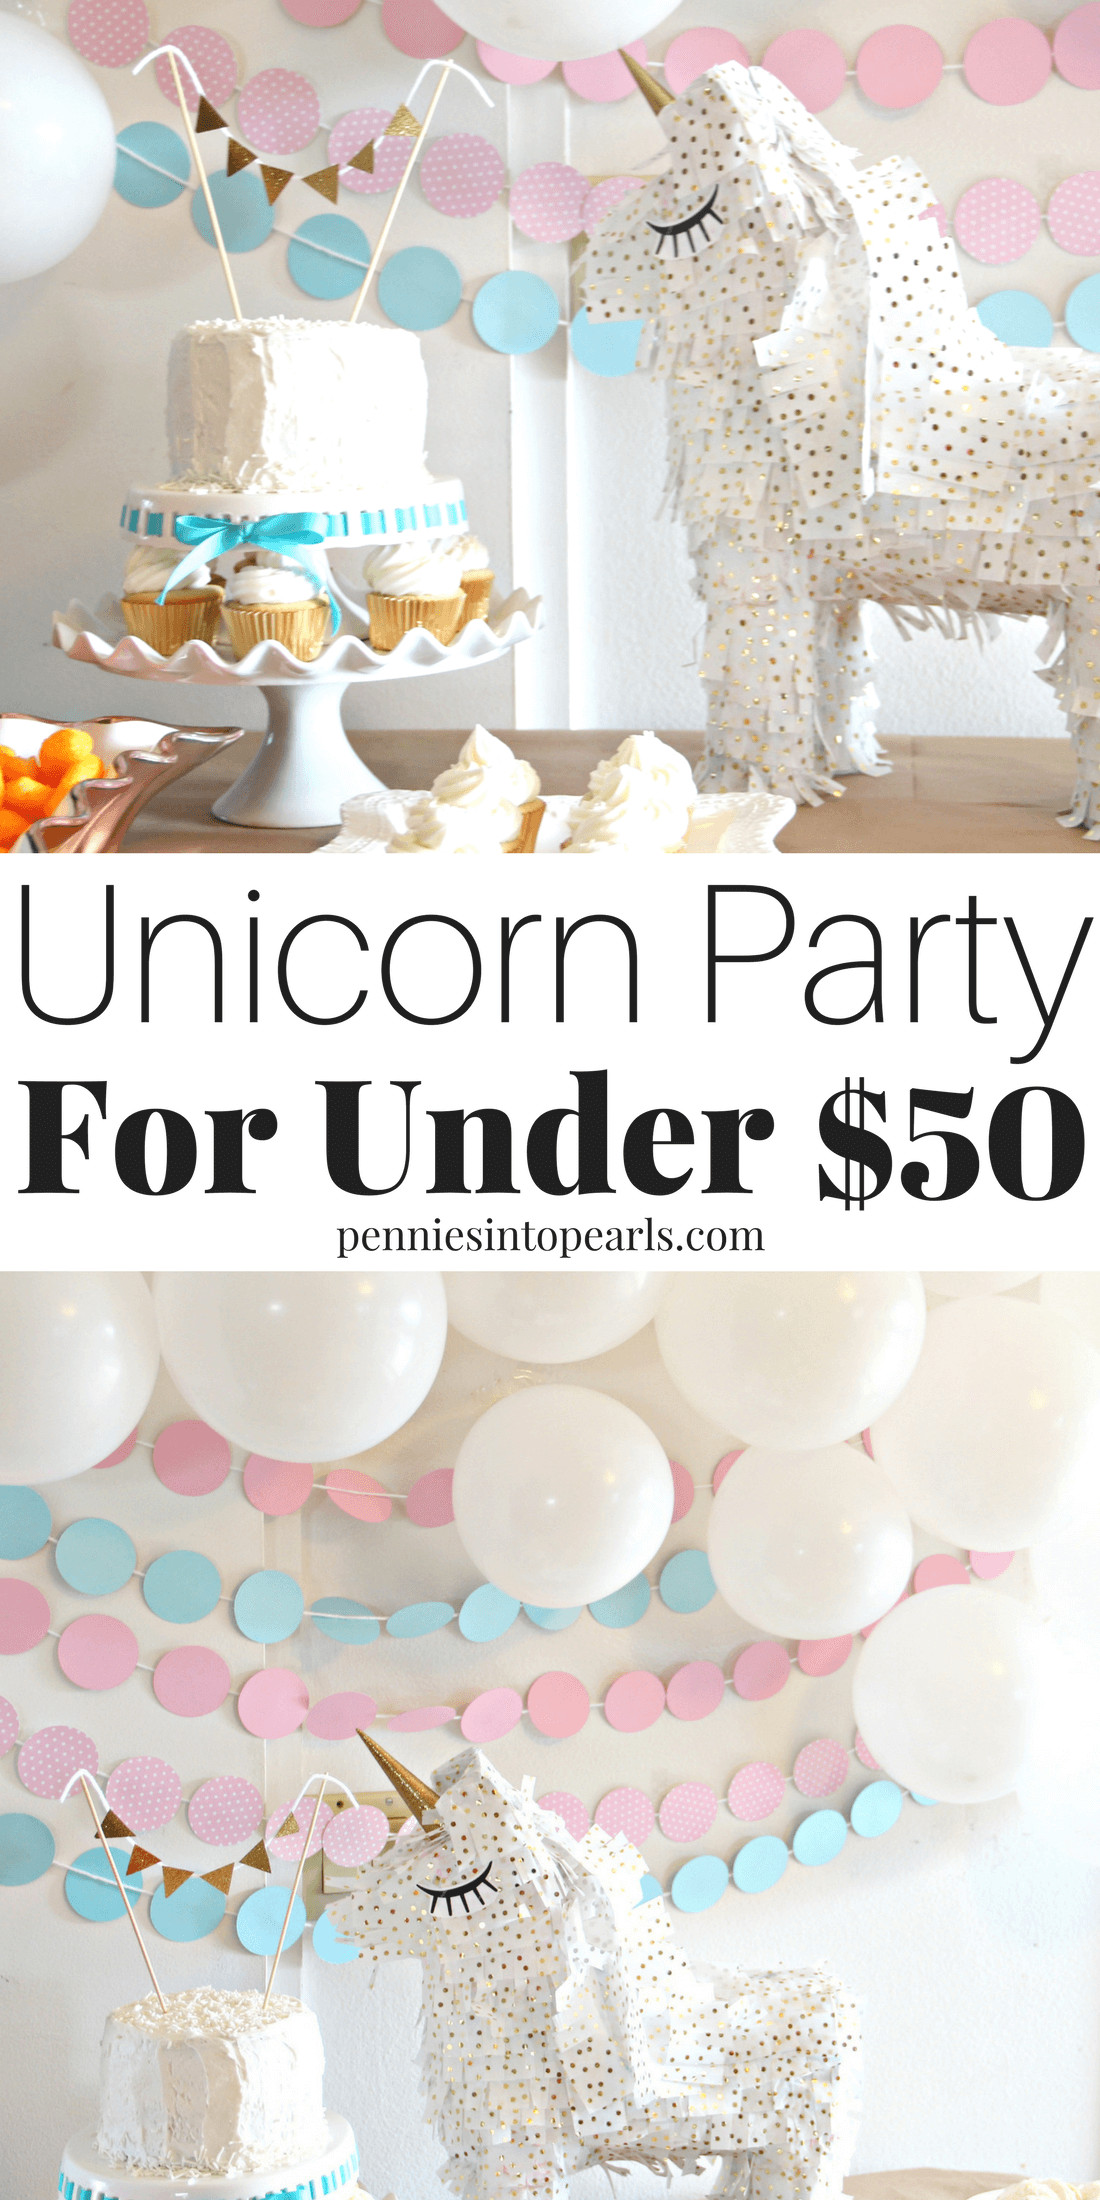 Ideas For A Unicorn Child'S Birthday Party
 Unicorn Birthday Party Ideas on a Bud for Under $50